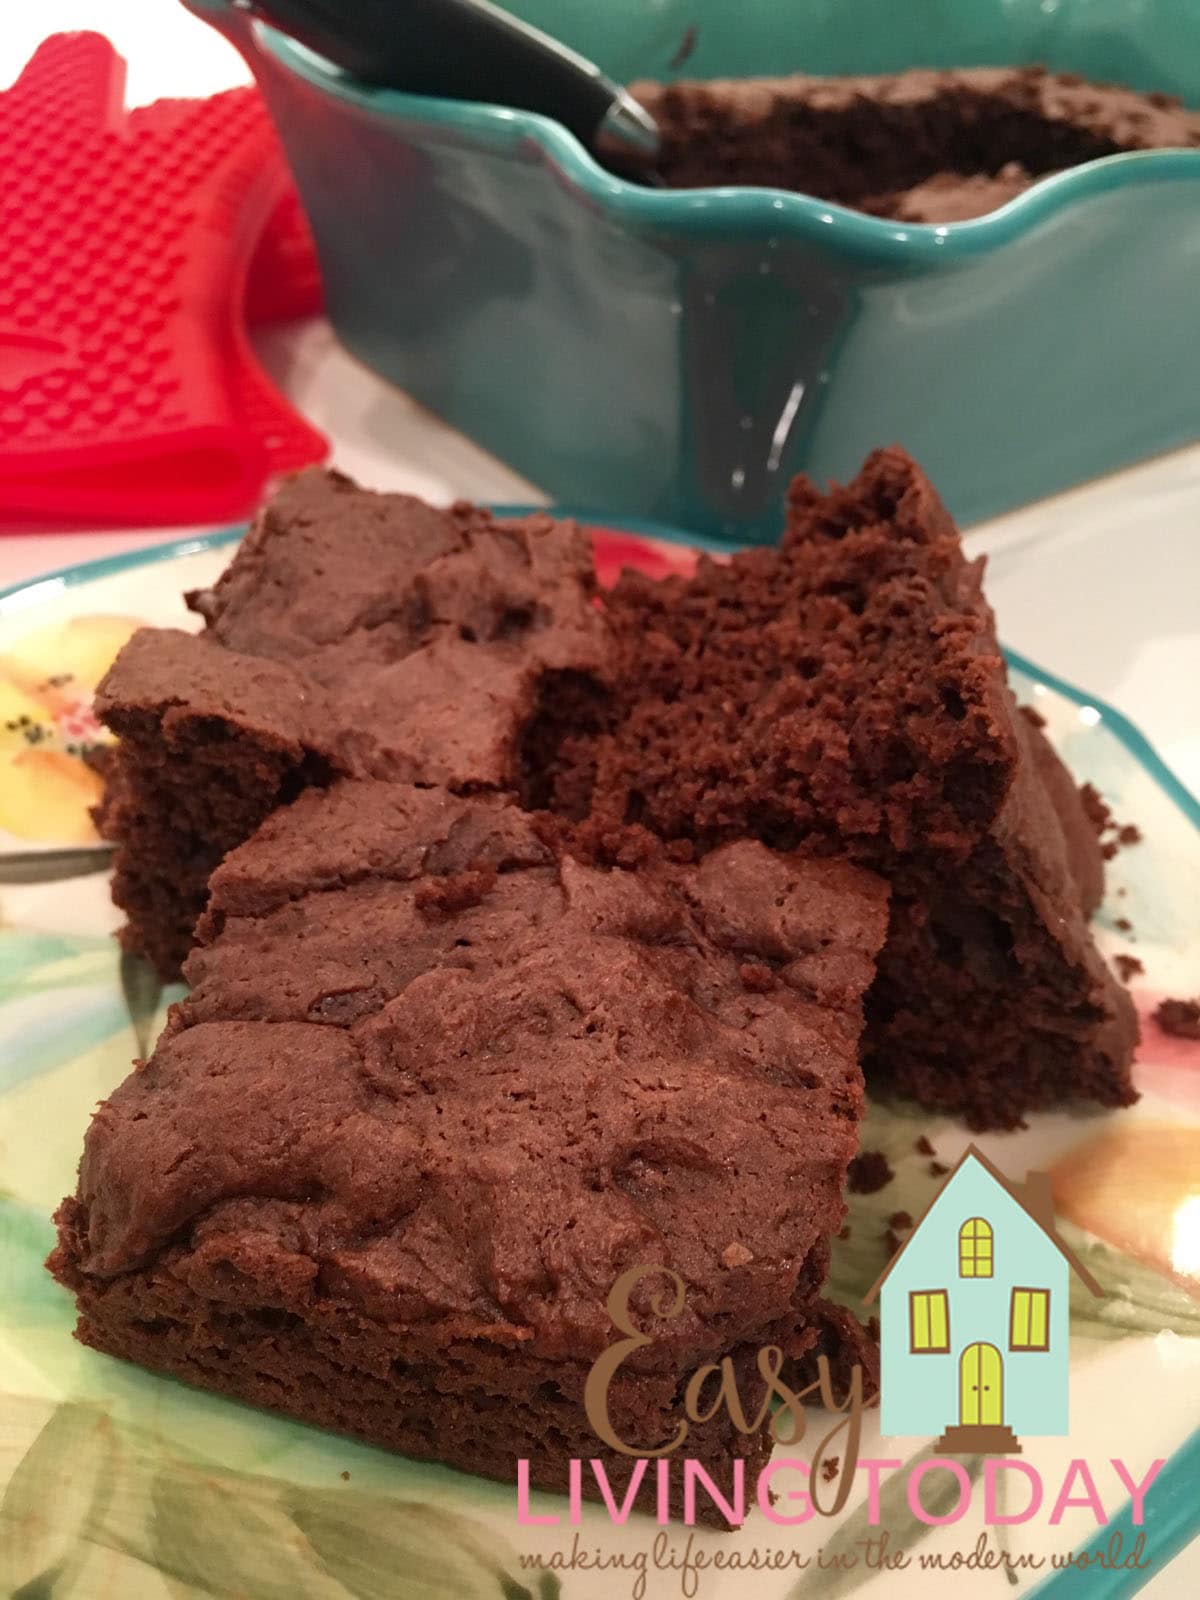 This is the best ever clean eating brownie recipe! Tons of flavor yet super healthy! You will feel like you're cheating without the extra calories ;)